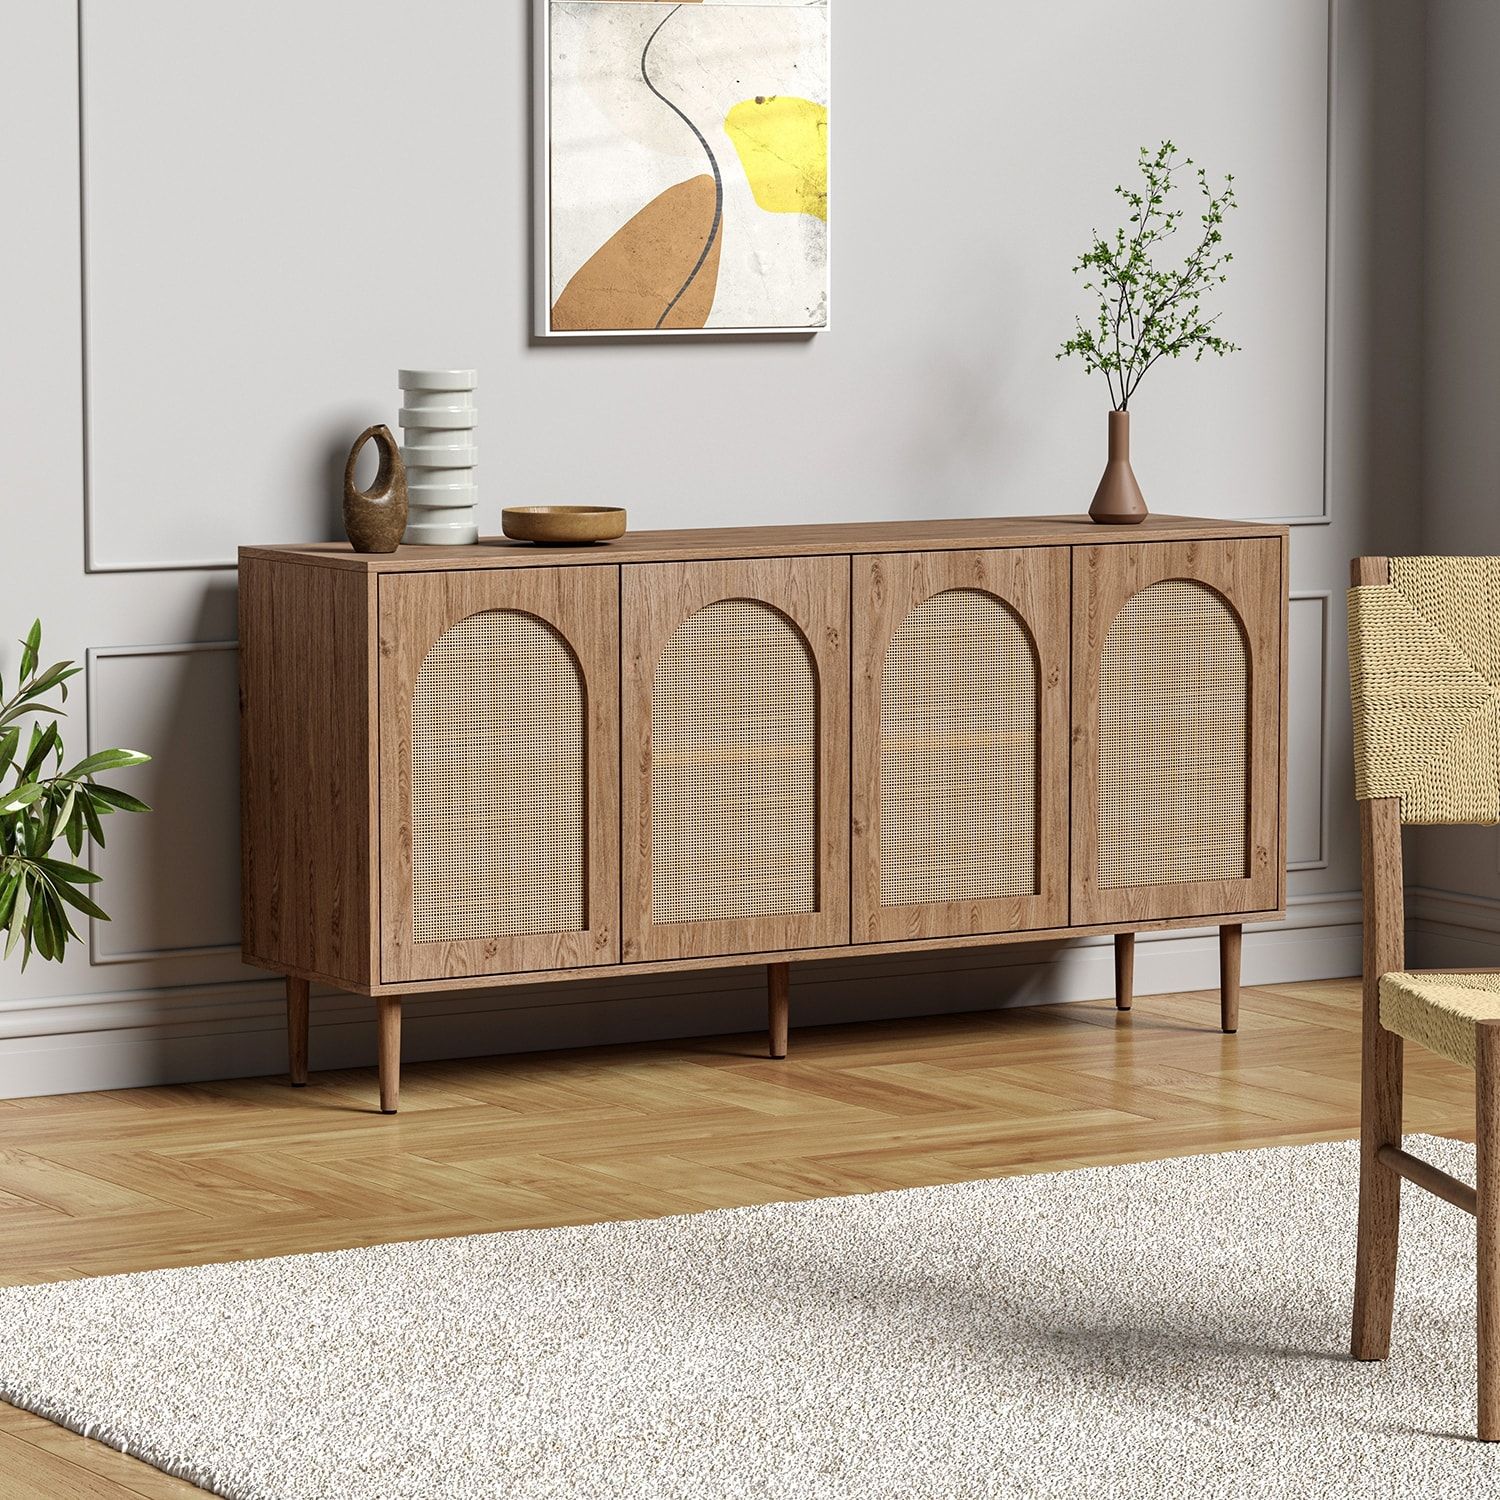 Uirico Multifunctional Buffet Sideboard Cabinet With Rattan Design Hulala Home – On Sale – Bed Bath & Beyond – 37218719 With Regard To Assembled Rattan Buffet Sideboards (View 12 of 15)